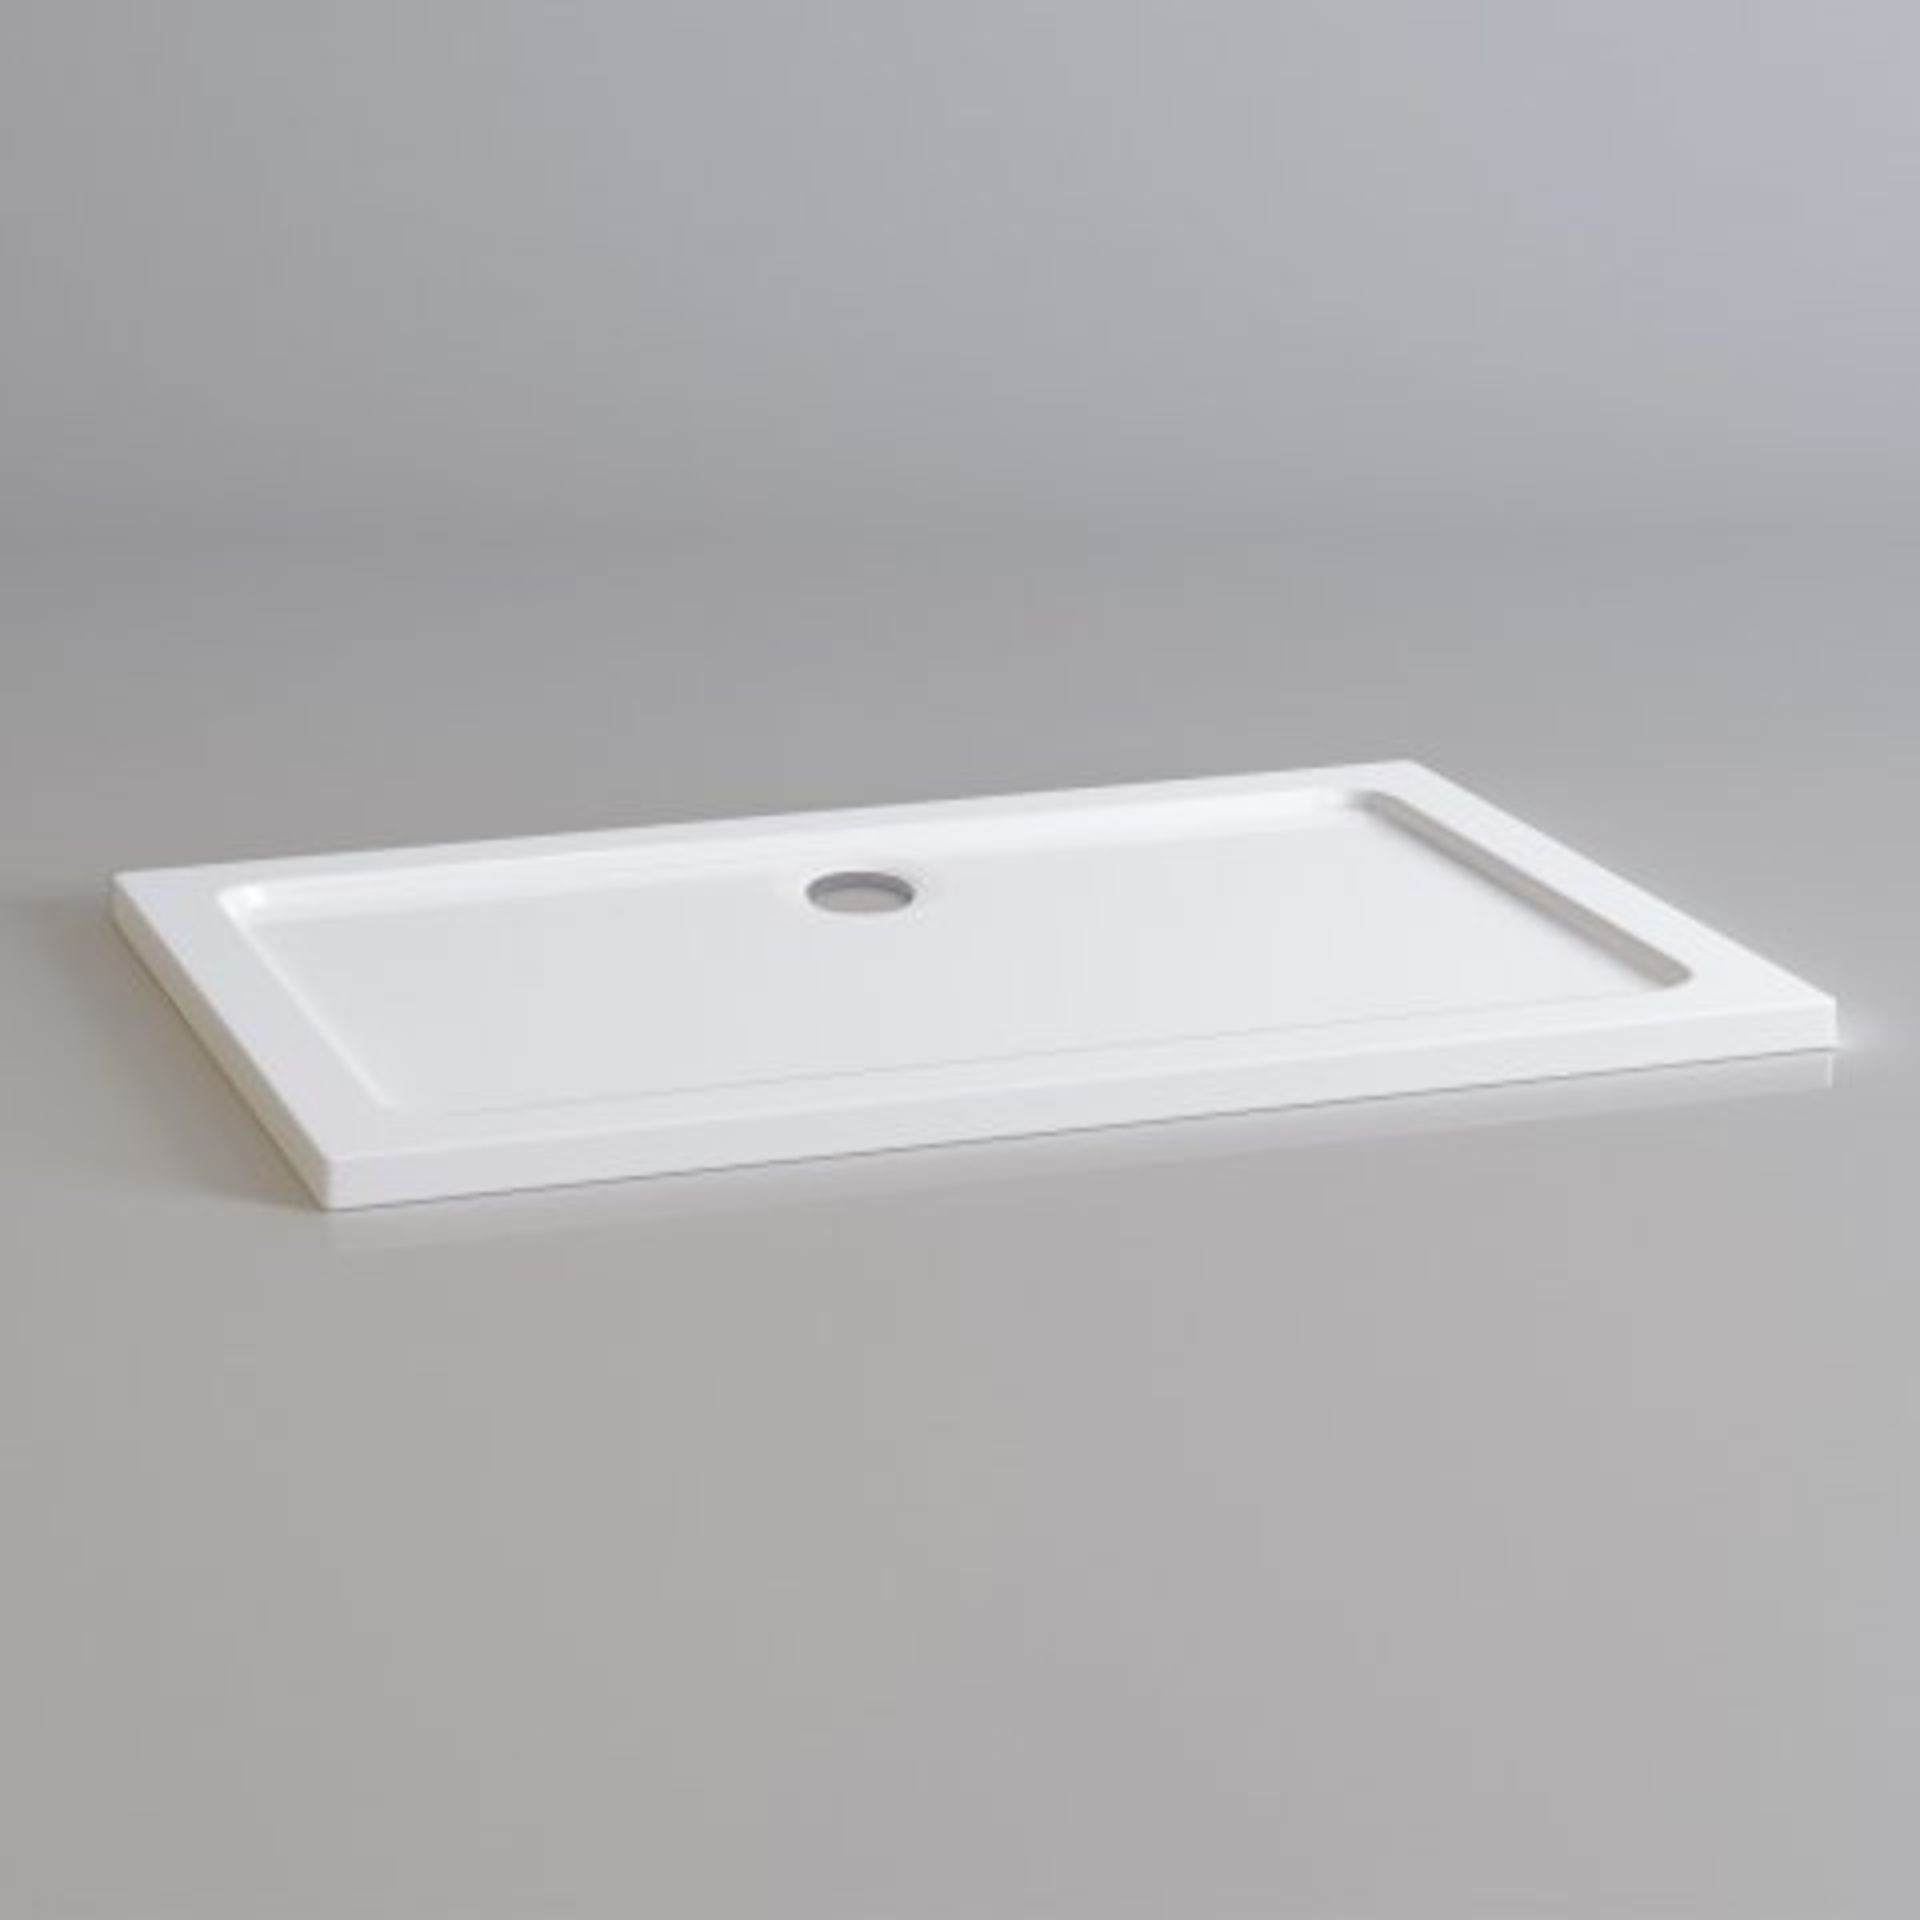 (T49) 1200x800mm Rectangular Ultra Slim Stone Shower Tray. RRP £274.99. Designed and made